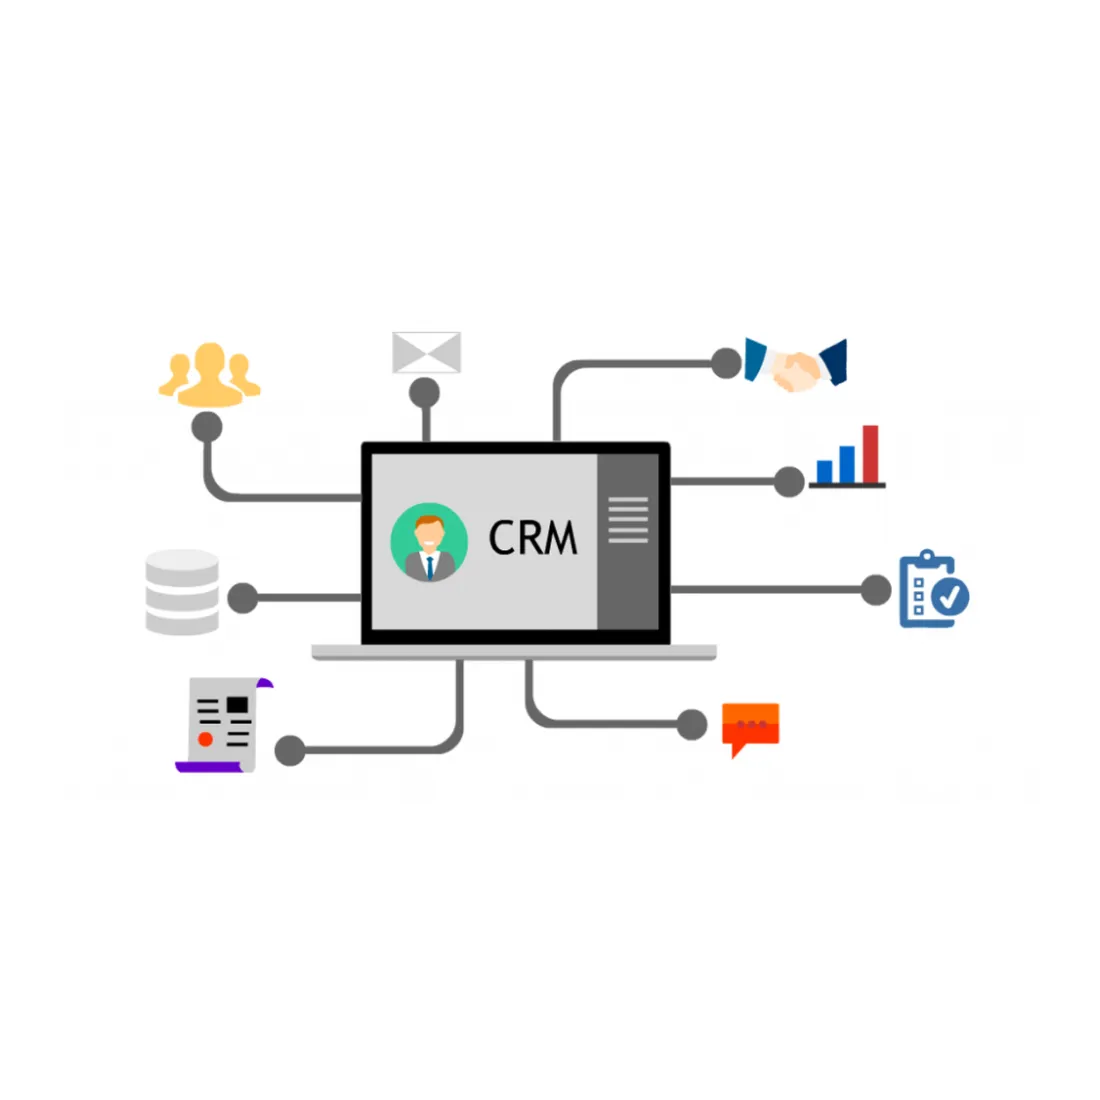 Professional custom CRM software development services that use latest technology to bring out the best result | UAE USA UK Dubai